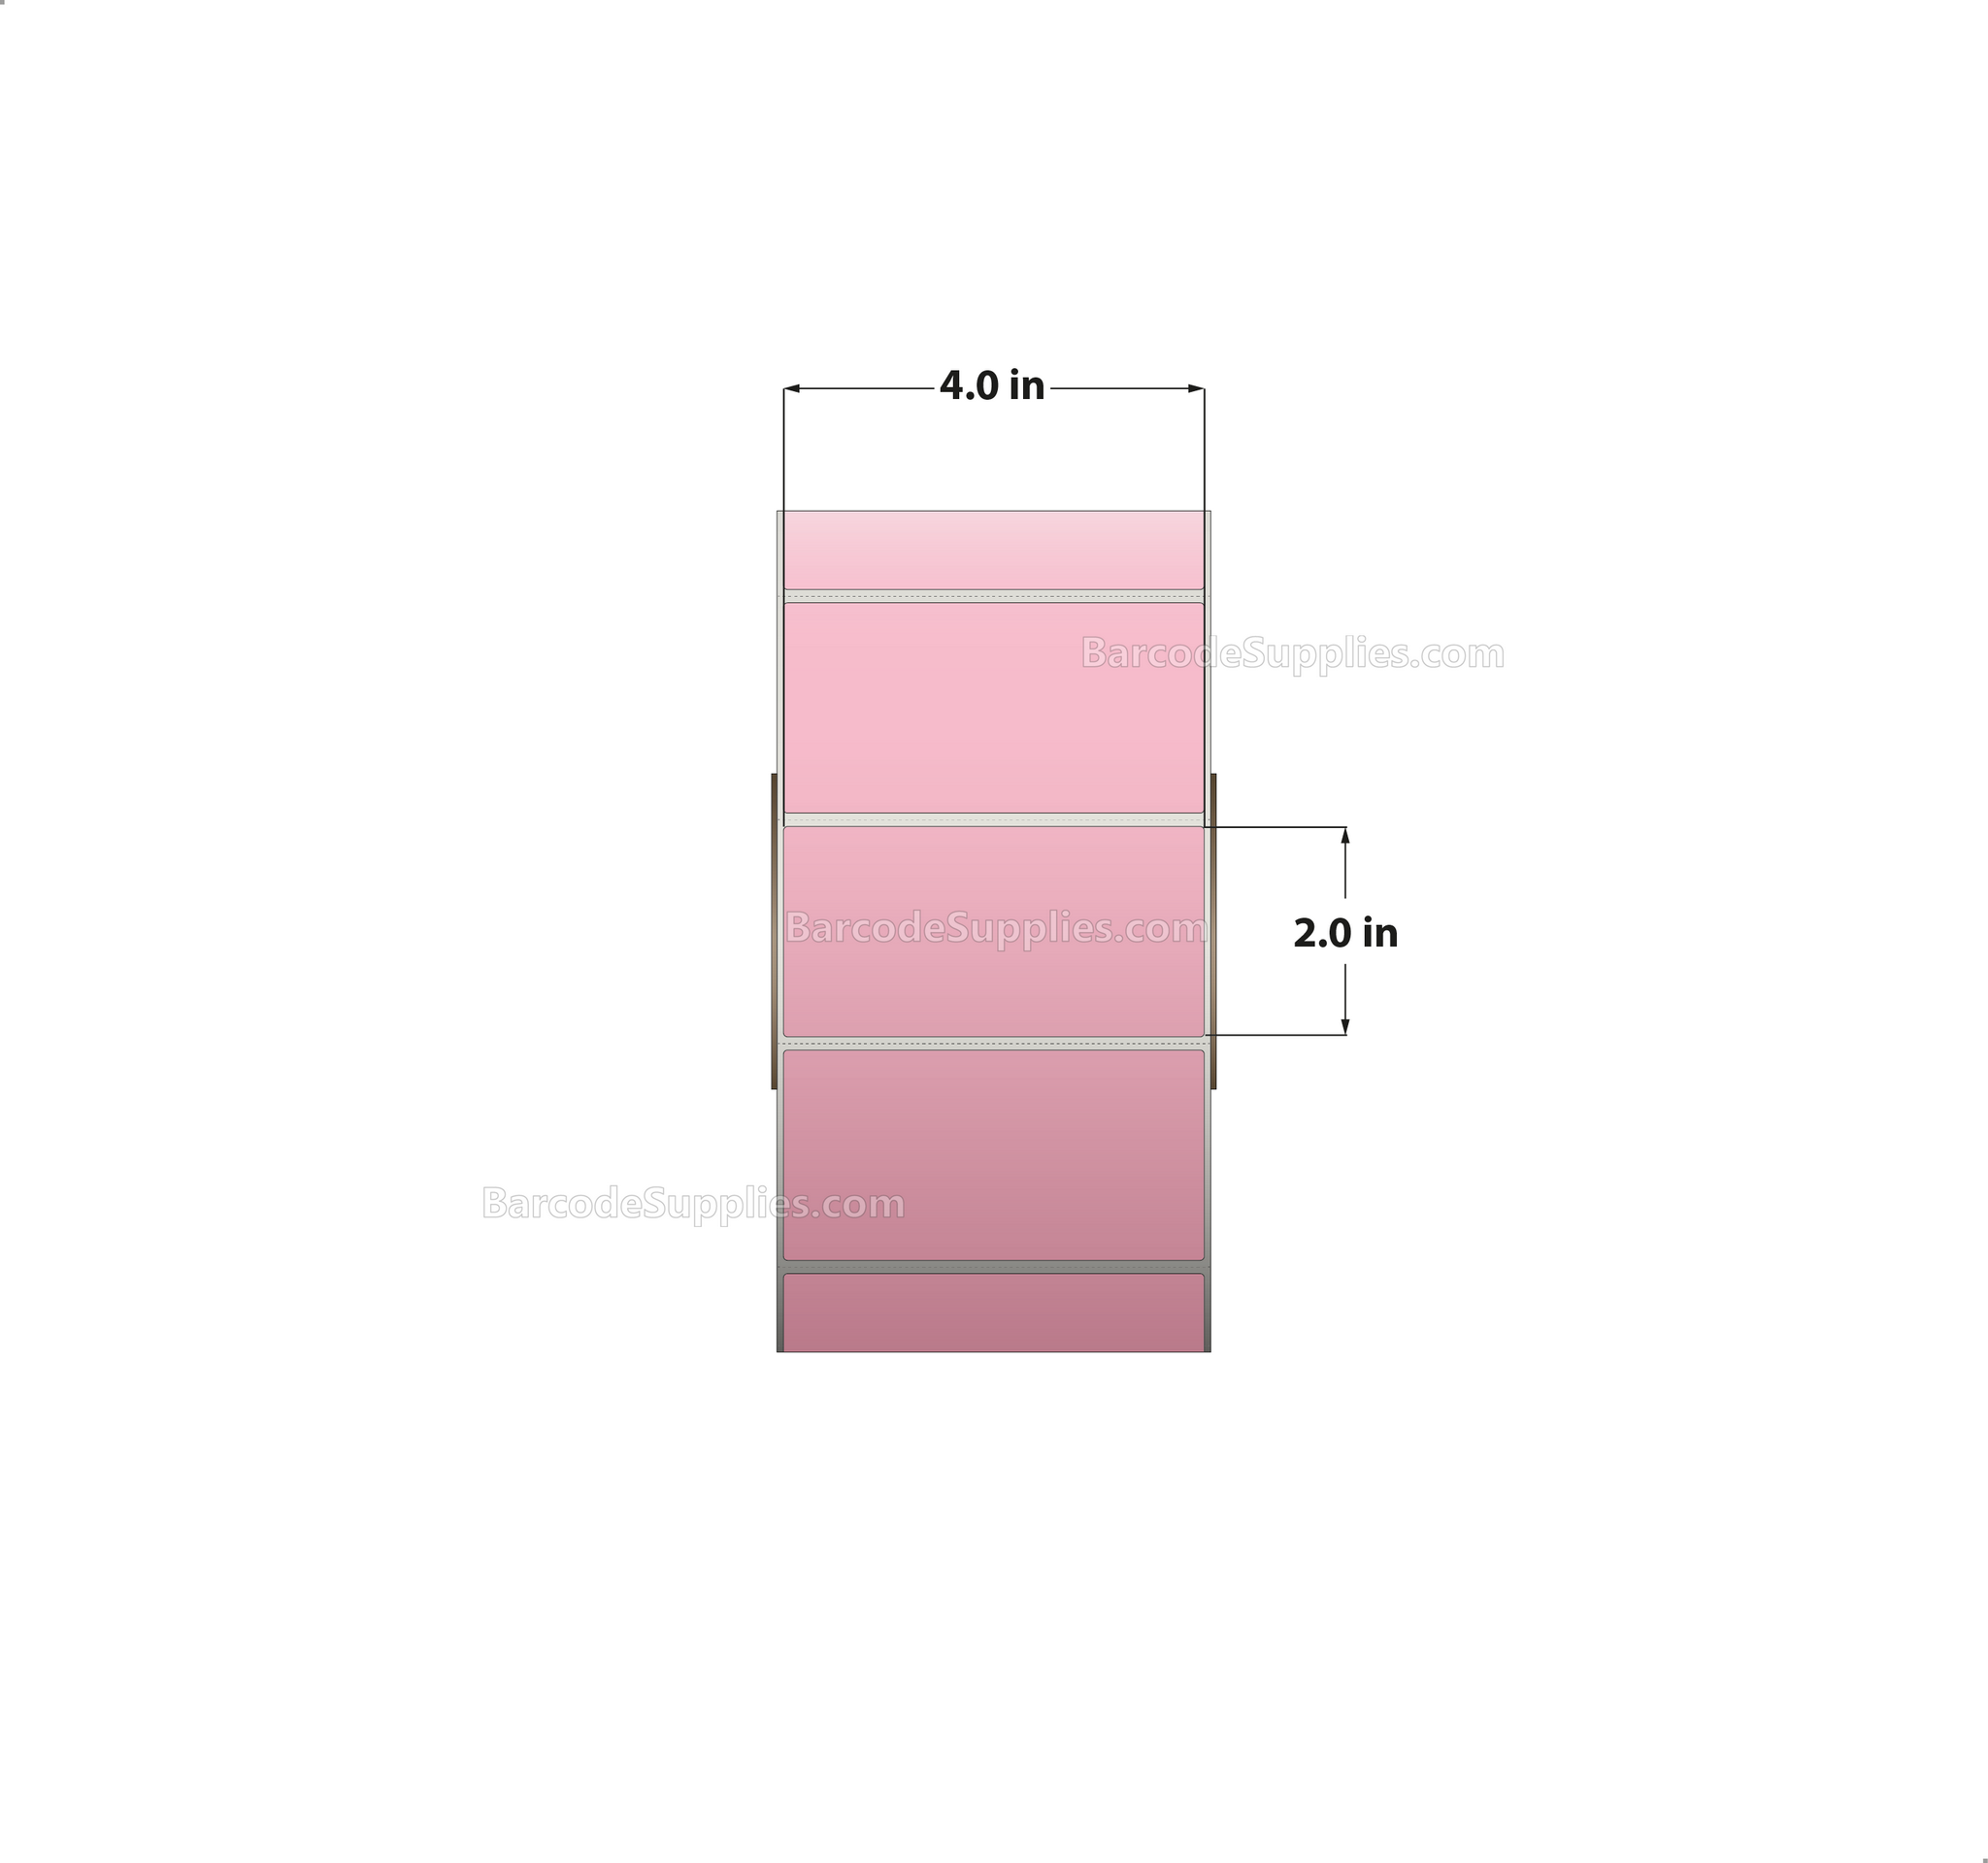 4 x 2 Thermal Transfer 176 Pink Labels With Permanent Adhesive - Perforated - 2900 Labels Per Roll - Carton Of 4 Rolls - 11600 Labels Total - MPN: RFC-4-2-2900-PK